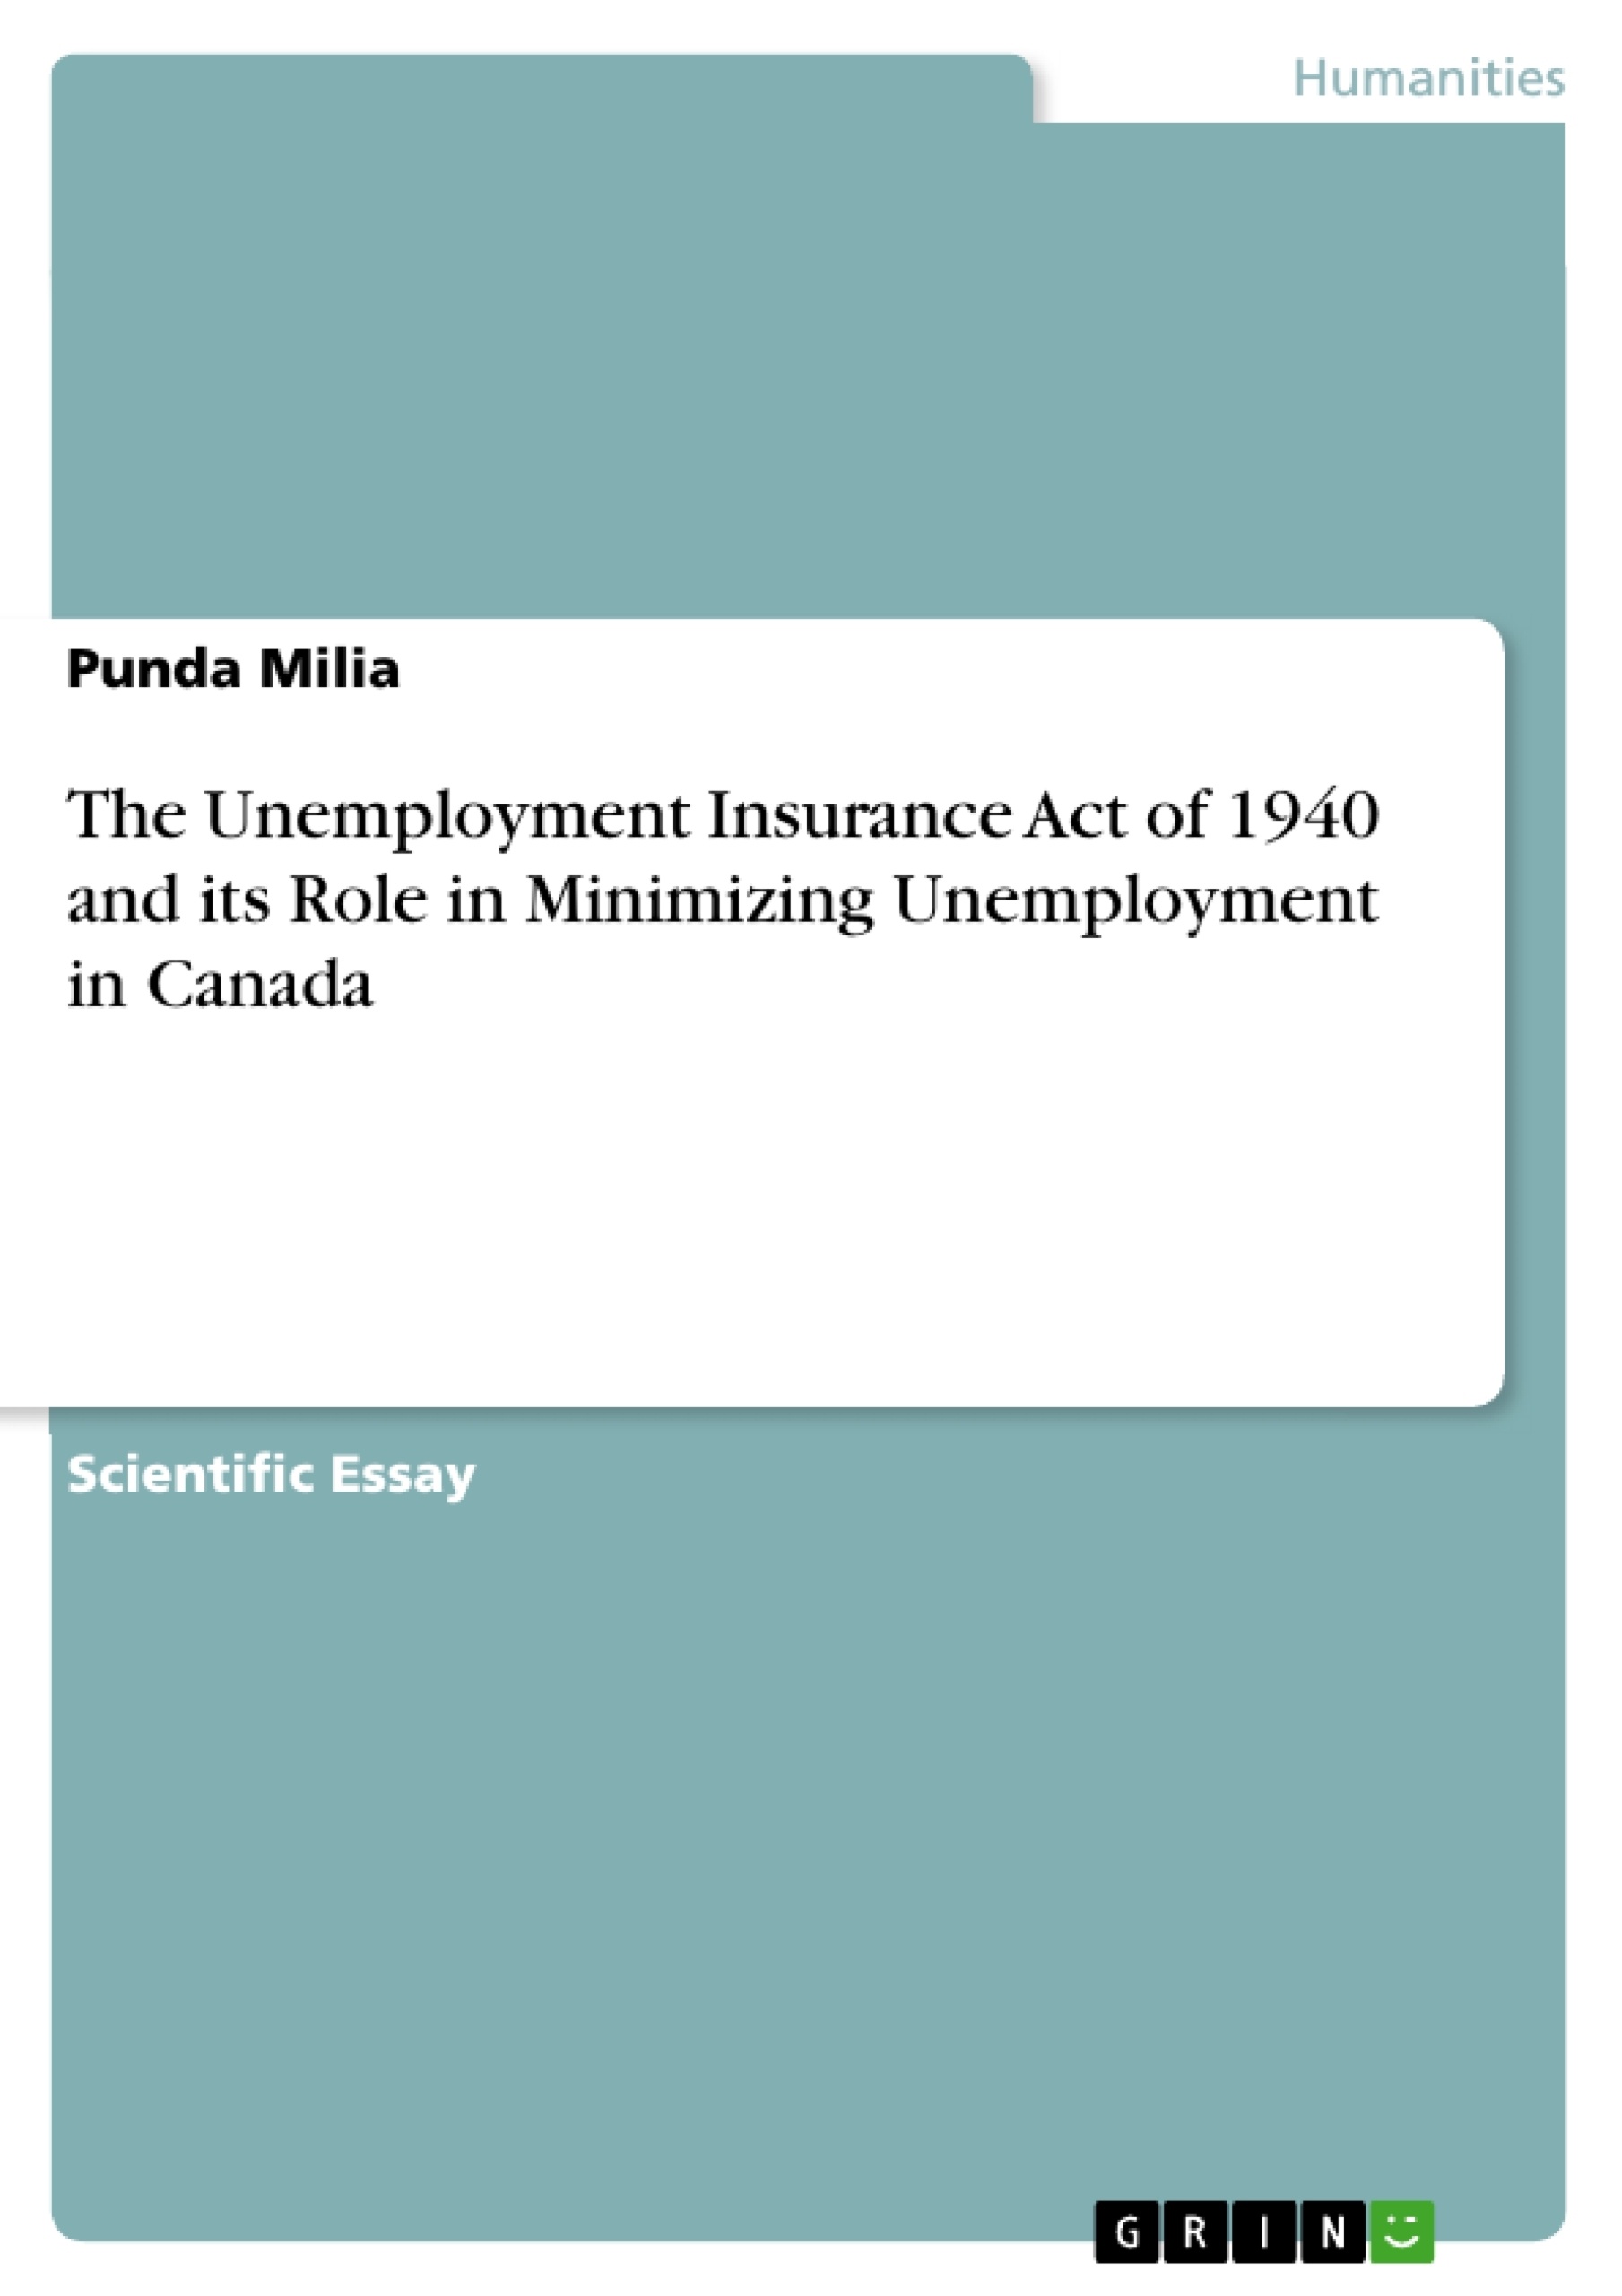 Titel: The Unemployment Insurance Act of 1940 and its Role in Minimizing Unemployment in Canada